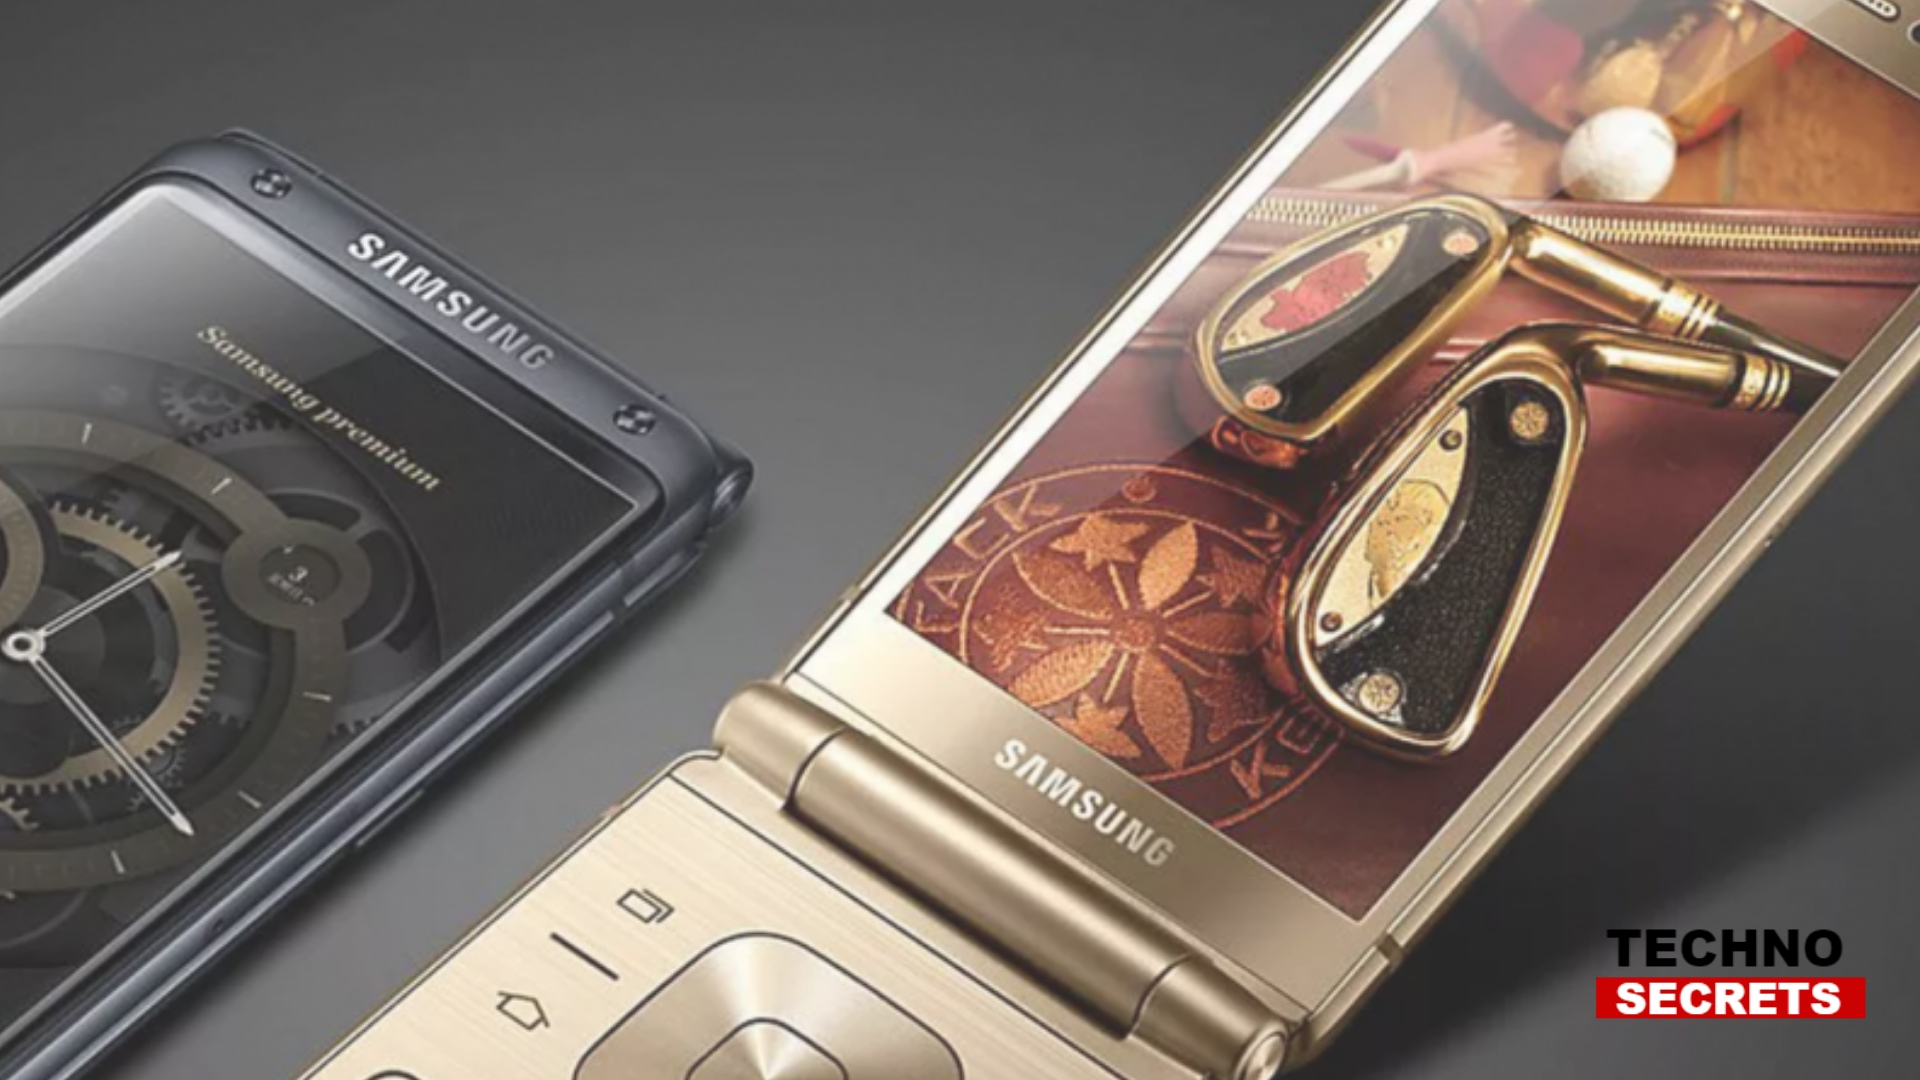 Samsung Has Launched W2019 Clamshell Phone With Dual Screen Display And Dual Rear Cameras